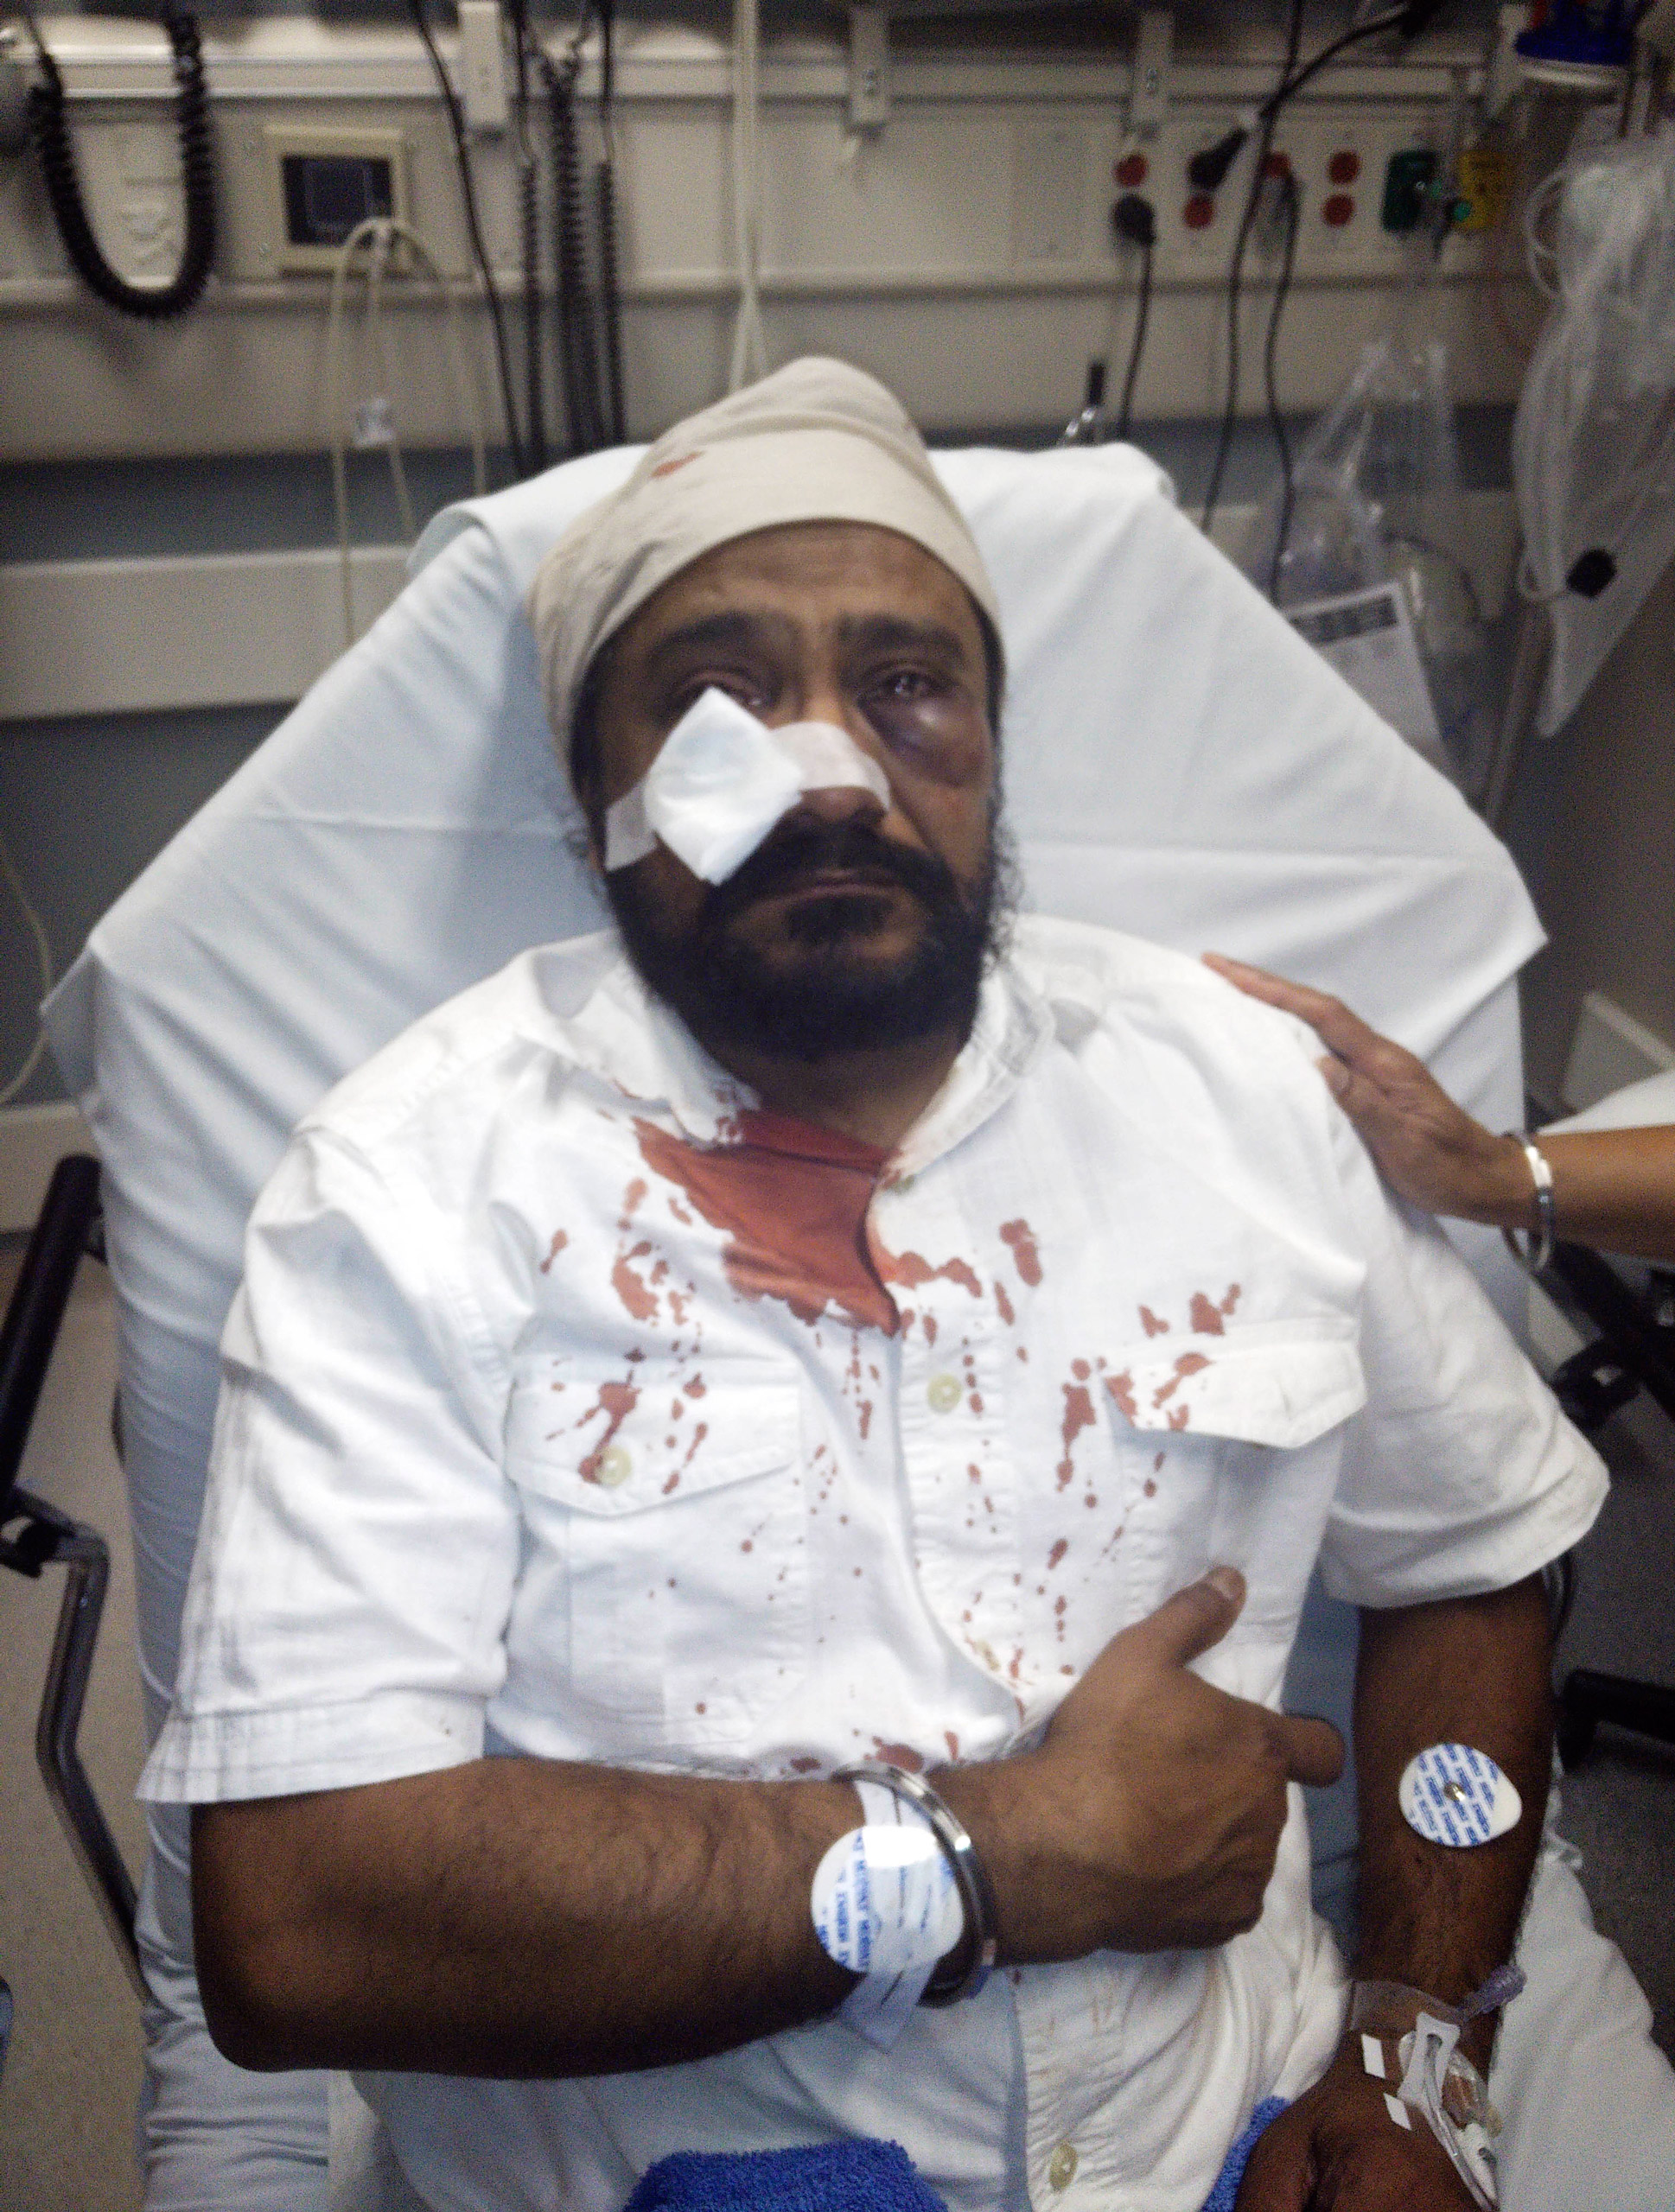 In this photo provided by The Sikh Coaliton, 53-year-old Inderjit Mukker is seen at a hospital in Hinsdale, Ill., on Sept. 8, 2015. (The Sikh Coalition/AP)